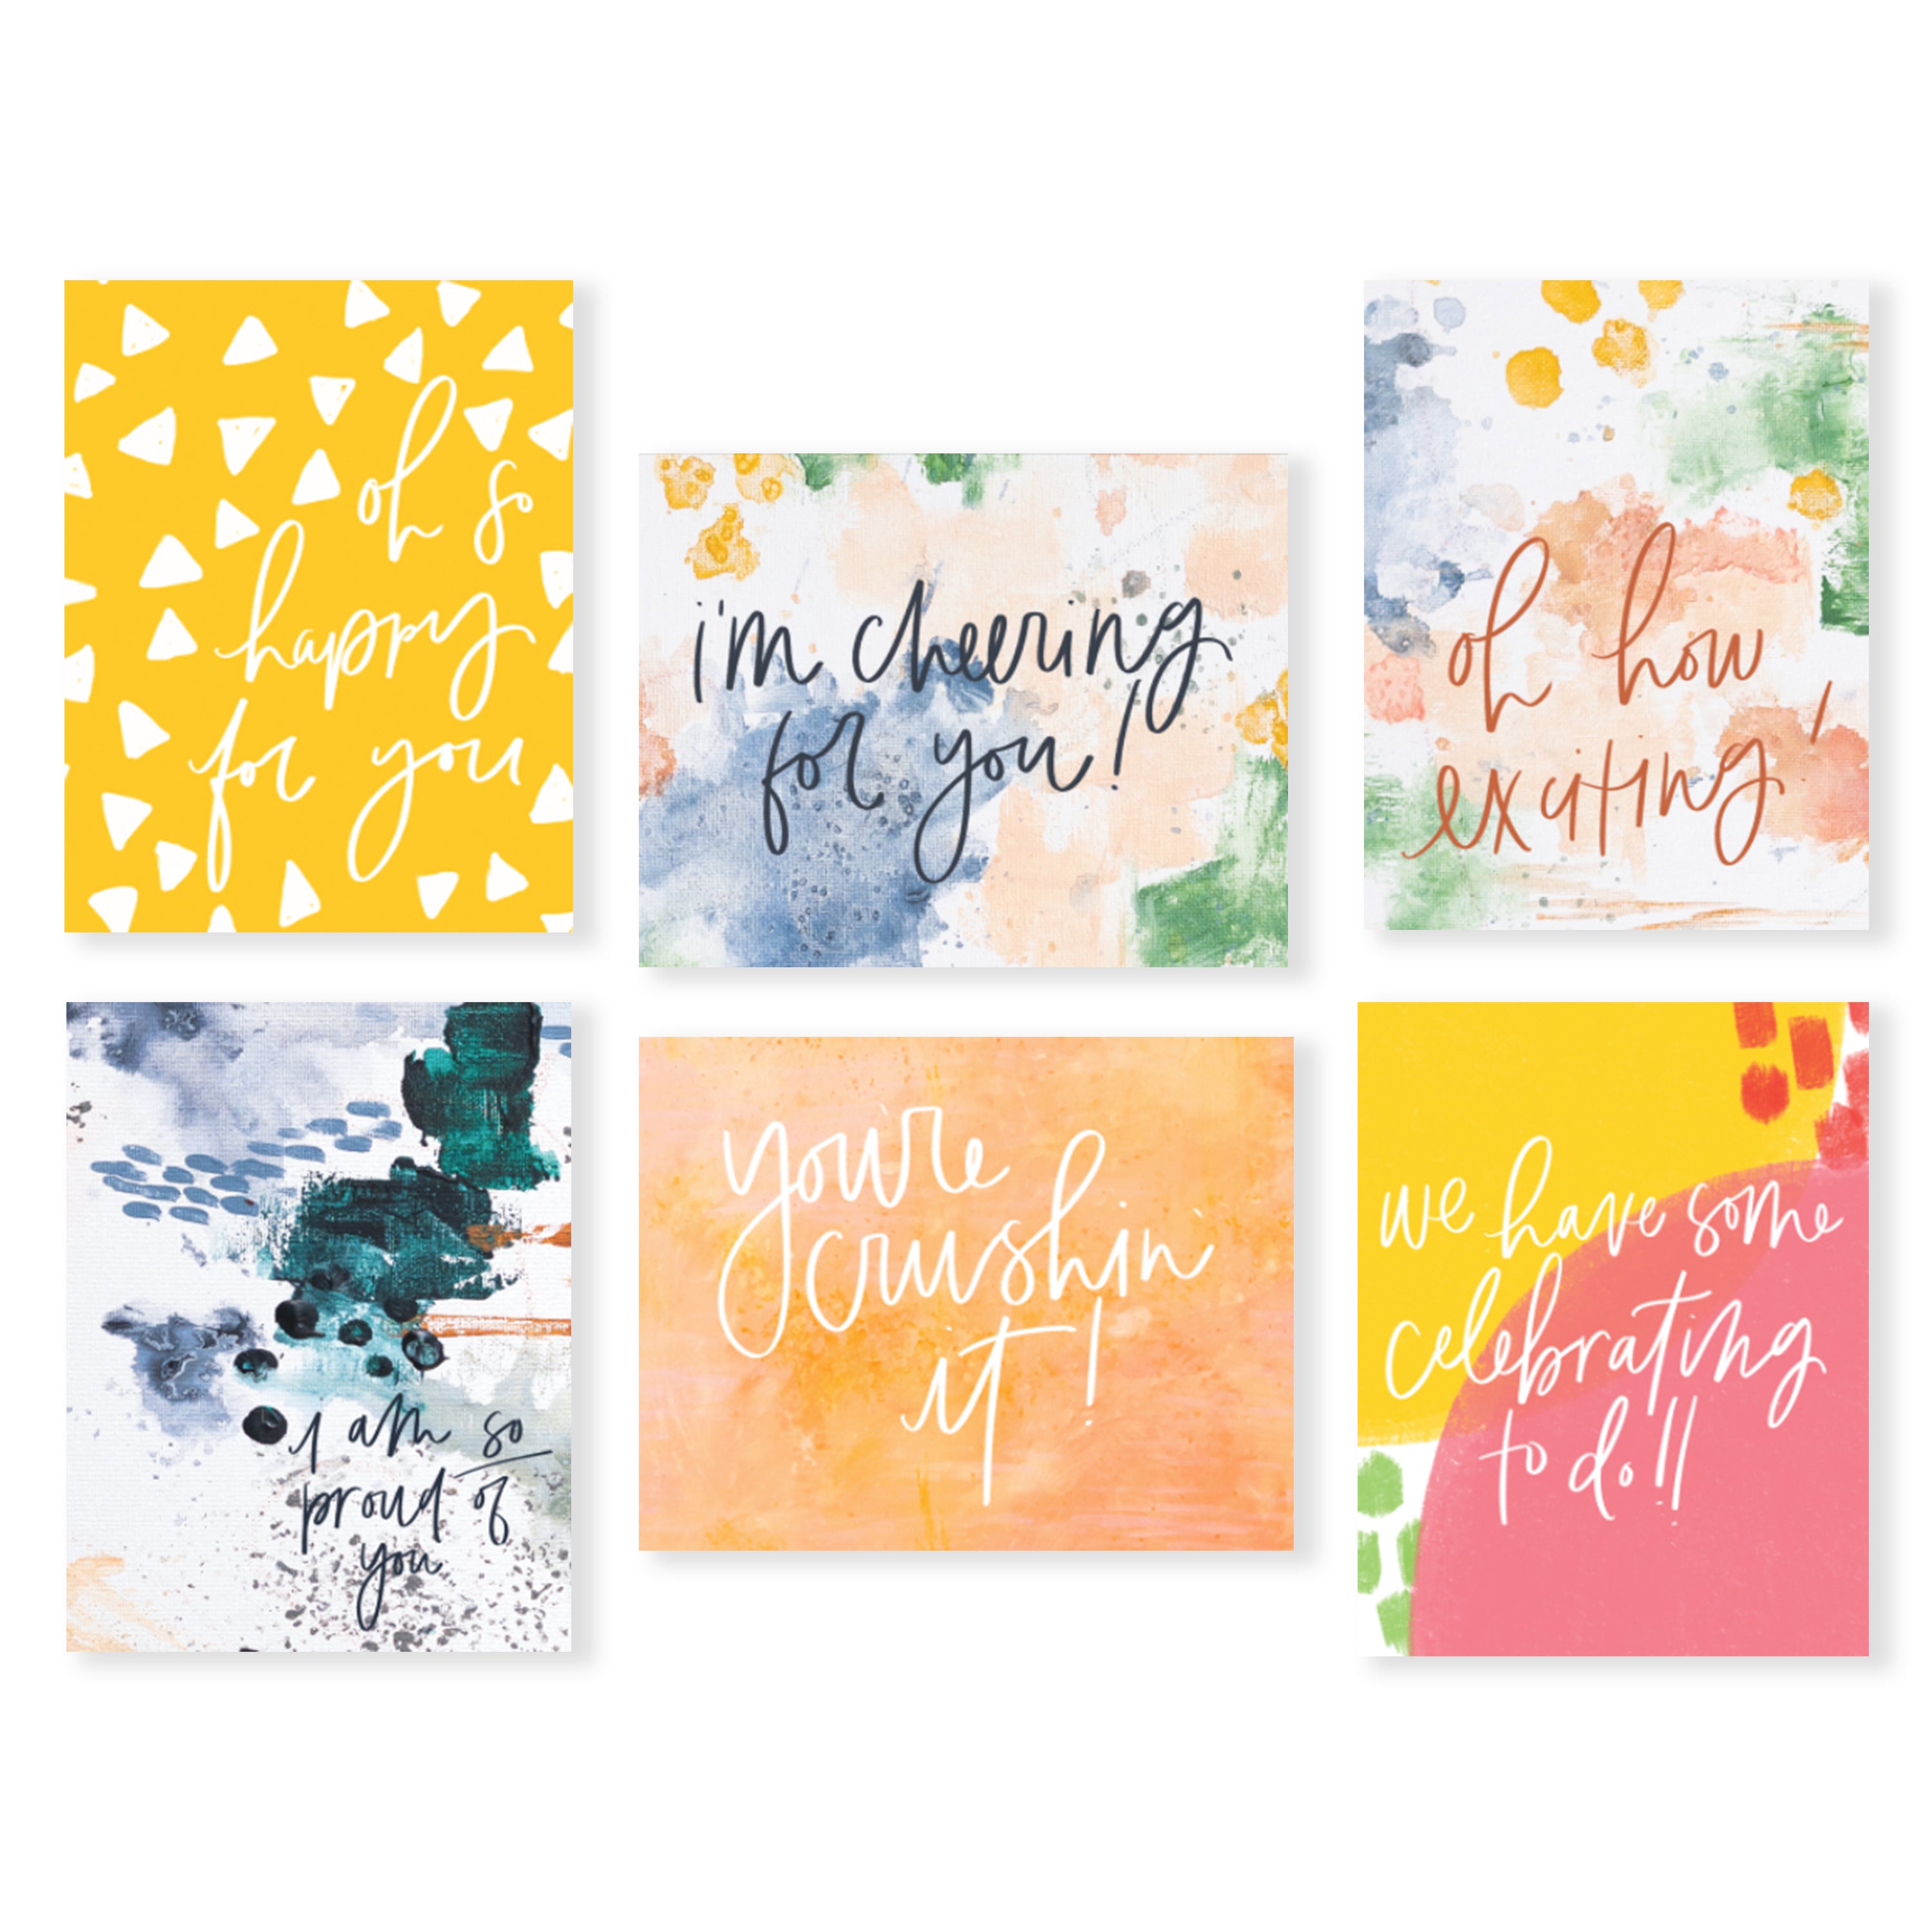 oh joyful day greeting card greeting cards set colorful stationery cheerful stationery heartfelt stationery heartfelt cards snail mail love letters illustration illustrator pittsburgh art pittsburgh artist calligraphy pittsburgh calligrapher handlettering handletterer abstract art abstract artist hooray cards congratulations card exciting card cards for celebrating proud of you card